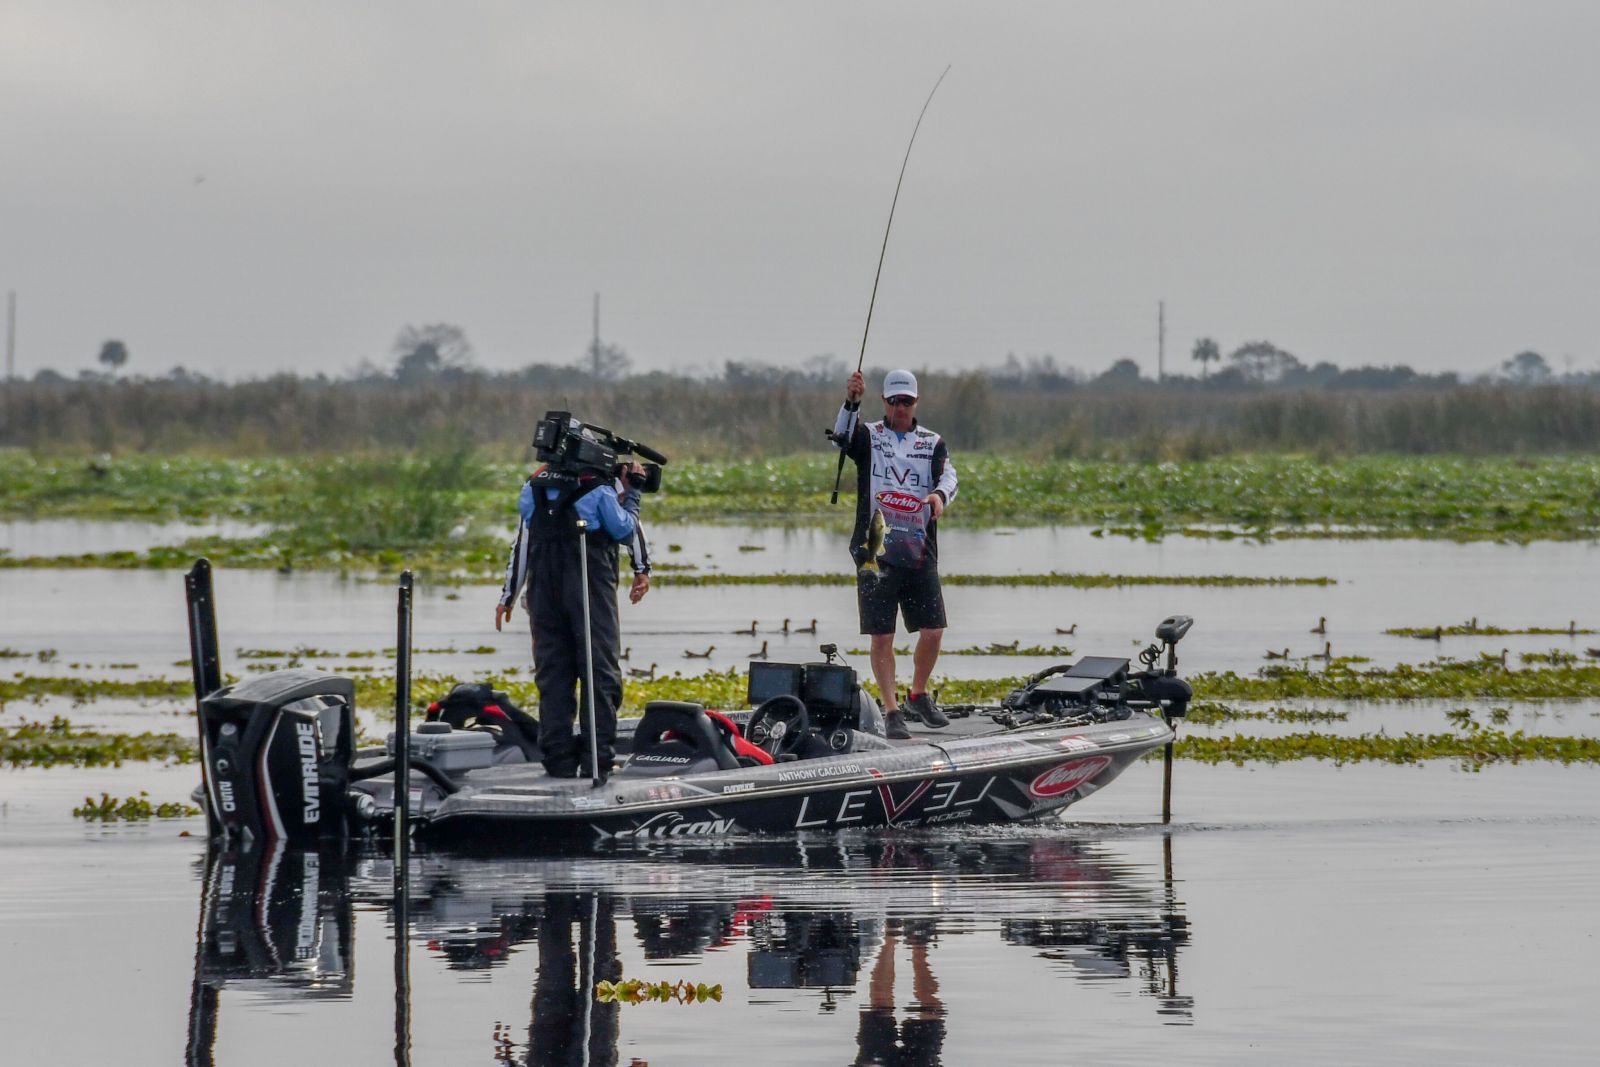 Professional angler Anthony Gagliardi's relationship with Falcon Boats has helped spur the company's growth, its owners say. (Photo/Roger Metz/Woods and Water SC)